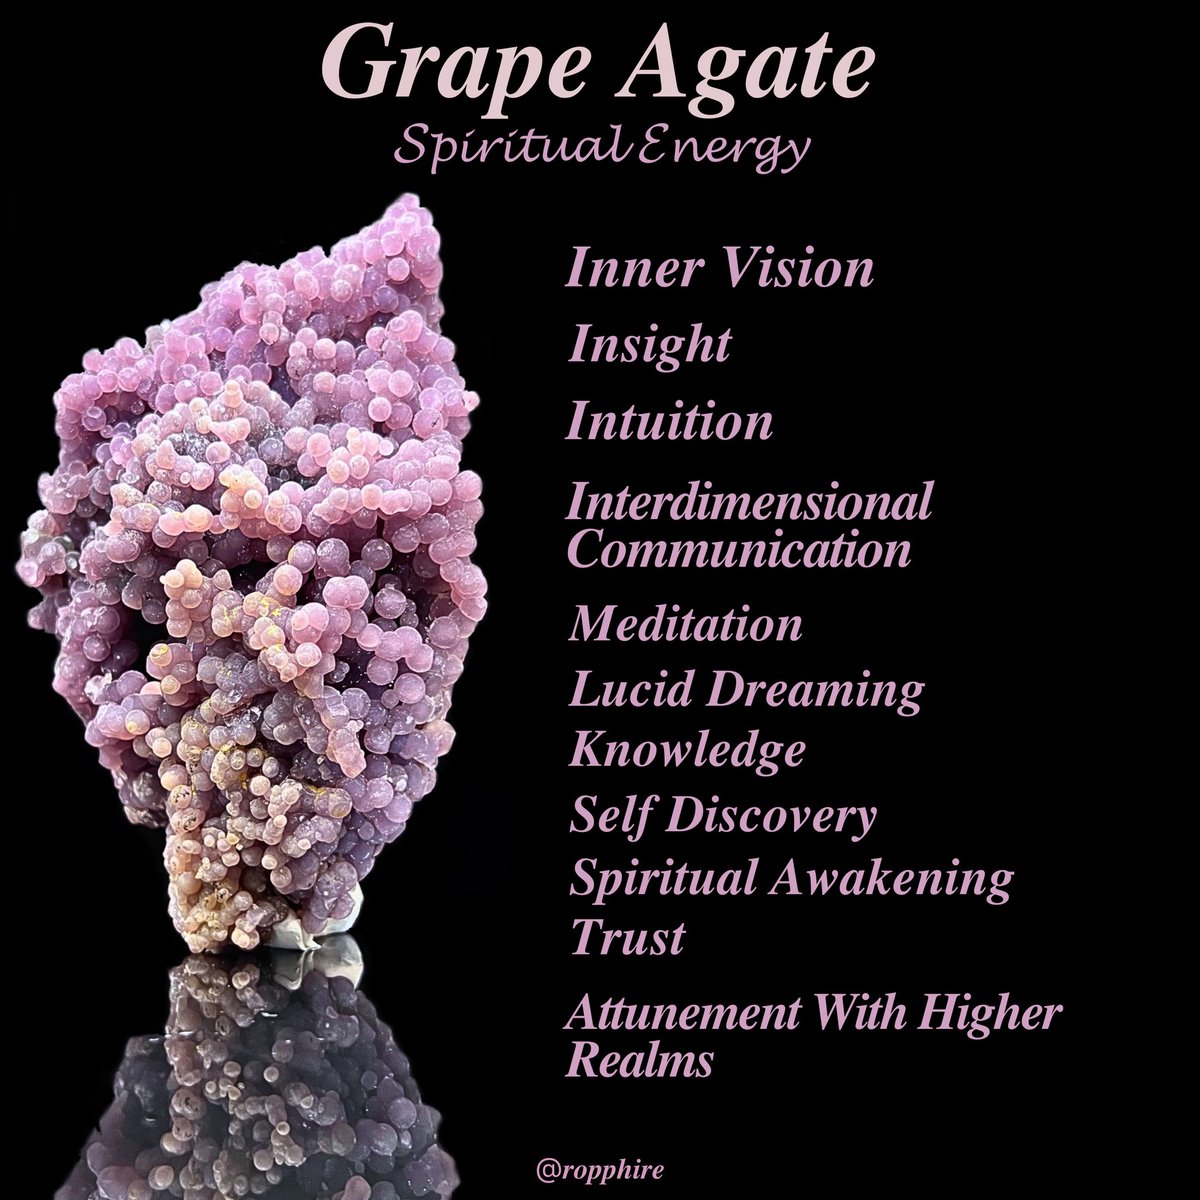 List of many of the metaphysical properties a grape agate has to offer
#ropphire #grapeagate #grapechalcedony #botryoidal #botryoidalagate #agatestones #chalcedonystone #purplechalcedony #naturalgemstones #gemstonelove #gemstoneseller #metaphysicalproperties #intuitiondevelopment